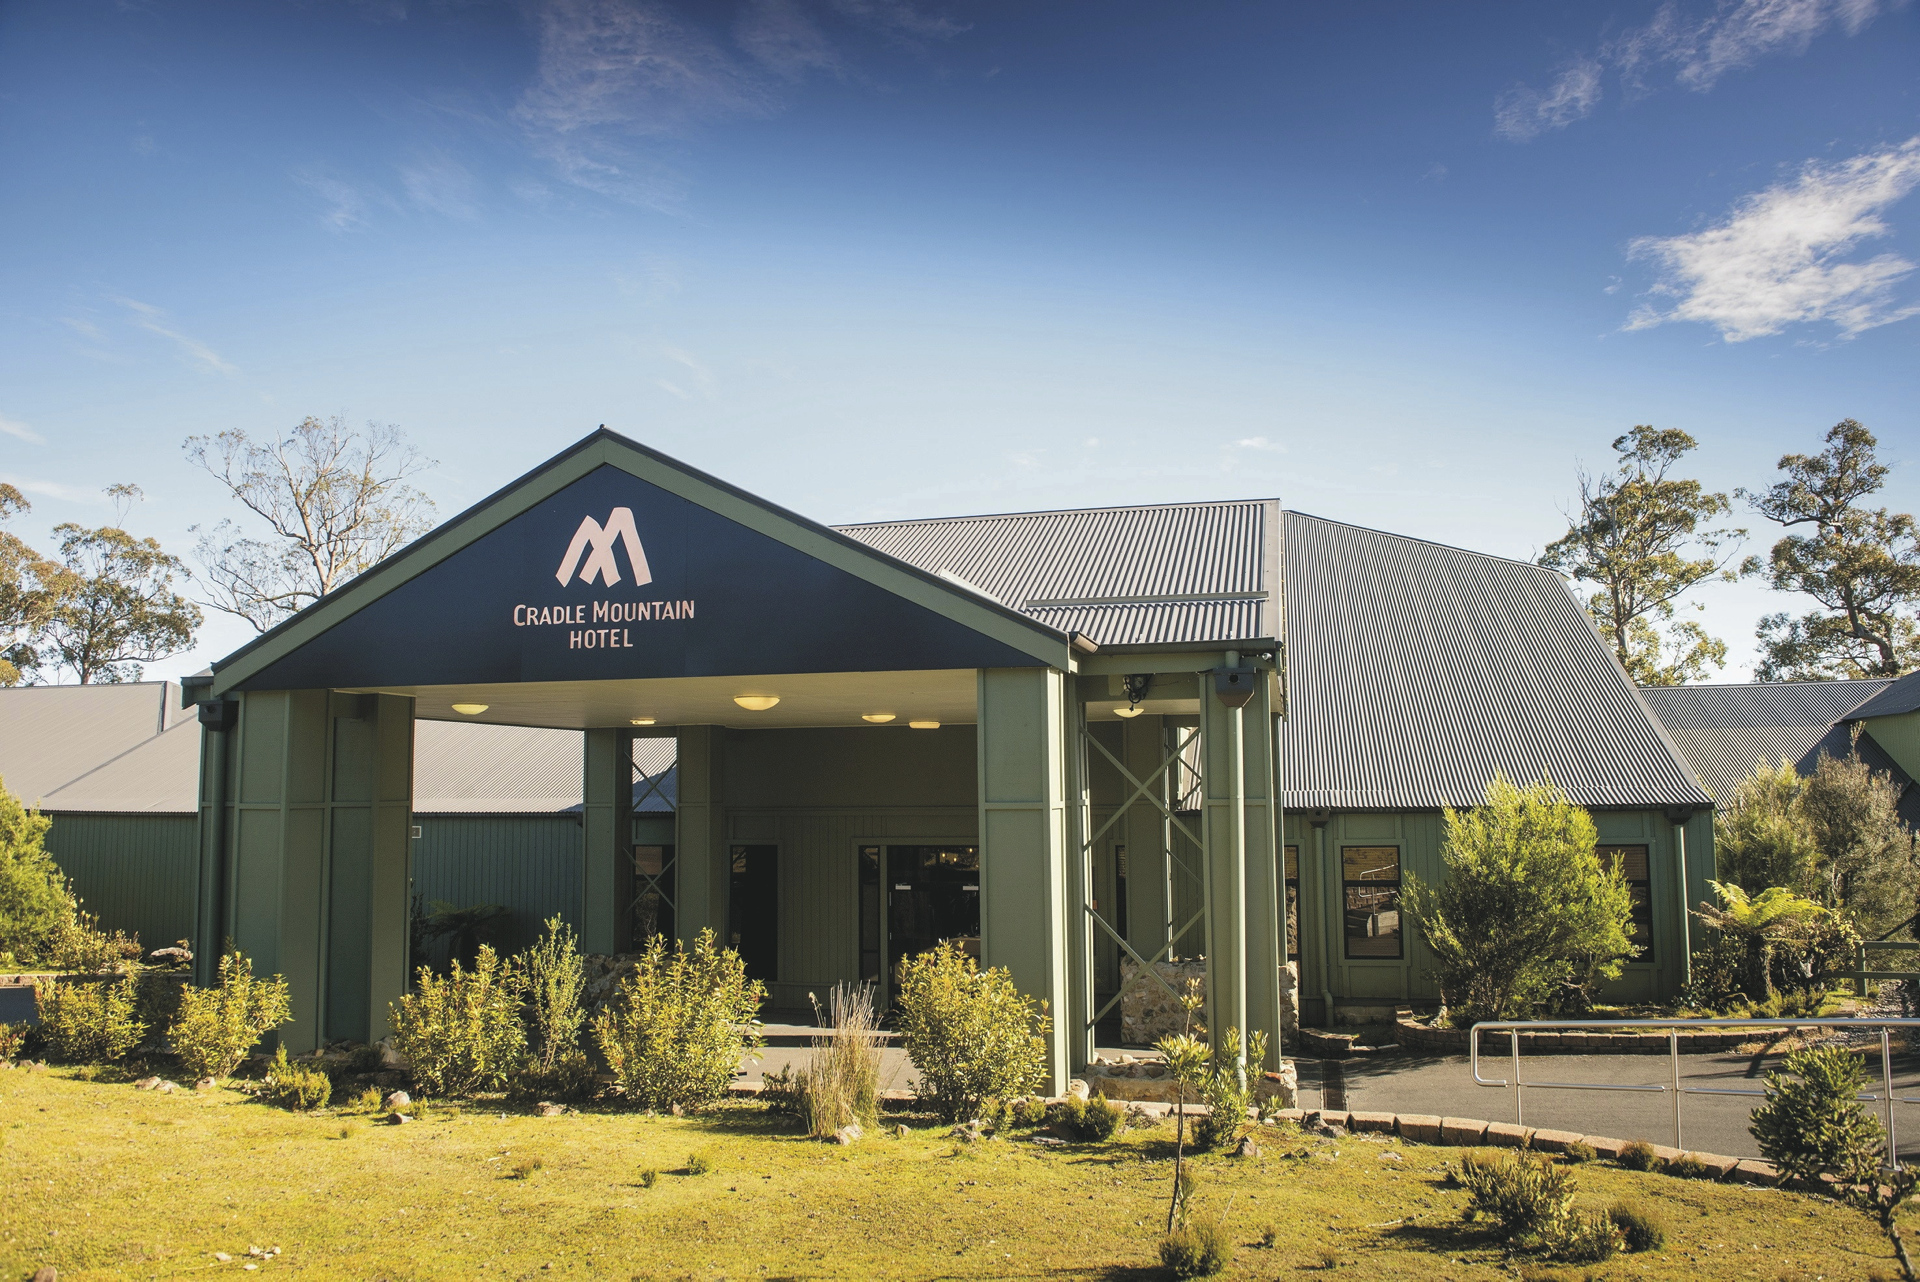 Cradle Mountain Hotel | accommodatie in Cradle Mountain NP